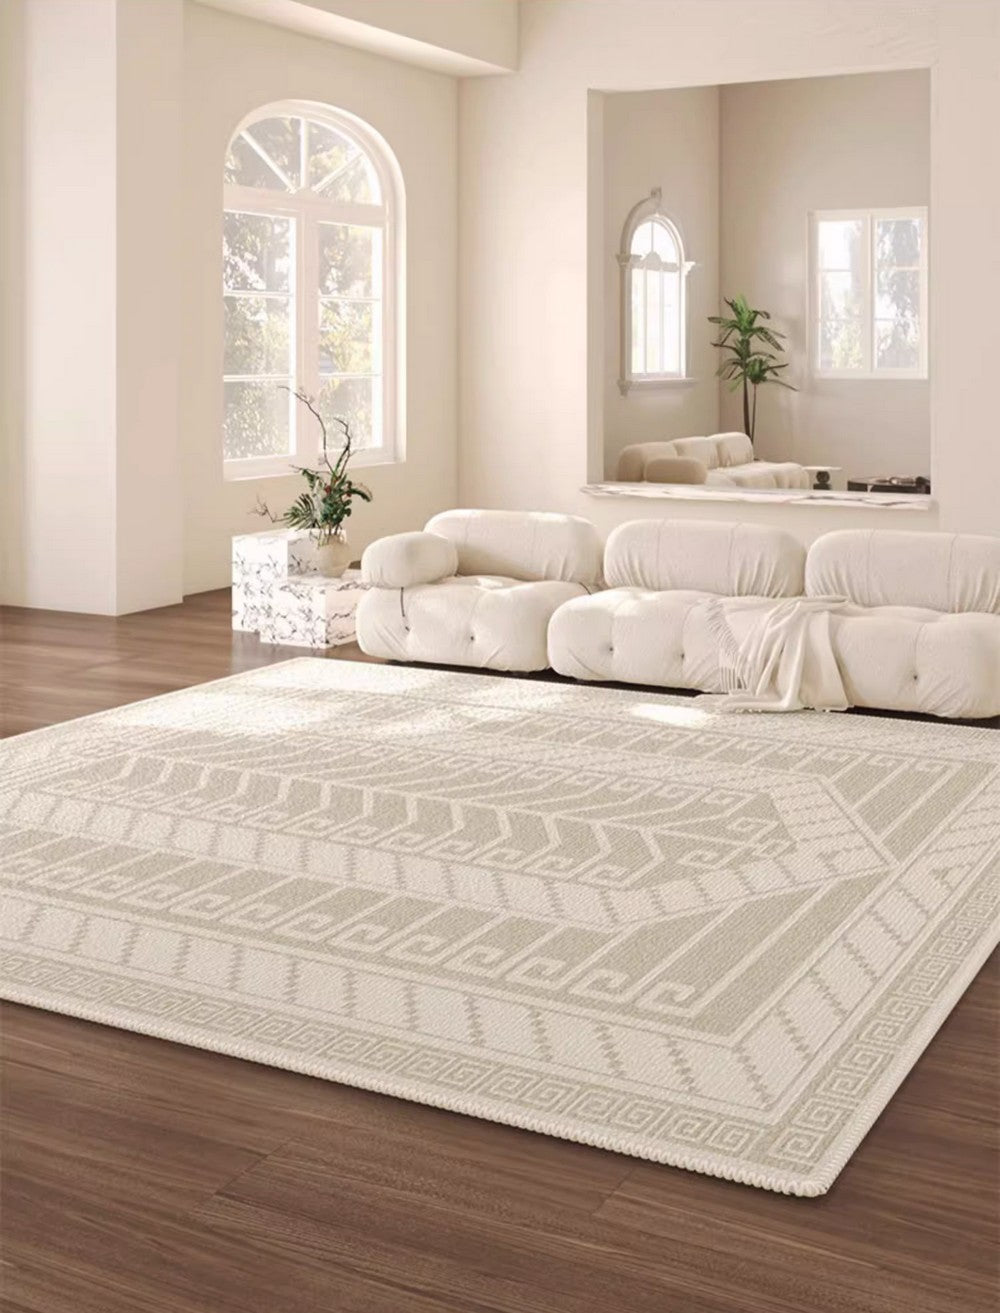 Large Modern Rugs for Living Room, Modern Rugs under Dining Room Table, Modern Carpets for Bedroom, Geometric Contemporary Modern Rugs Next to Bed